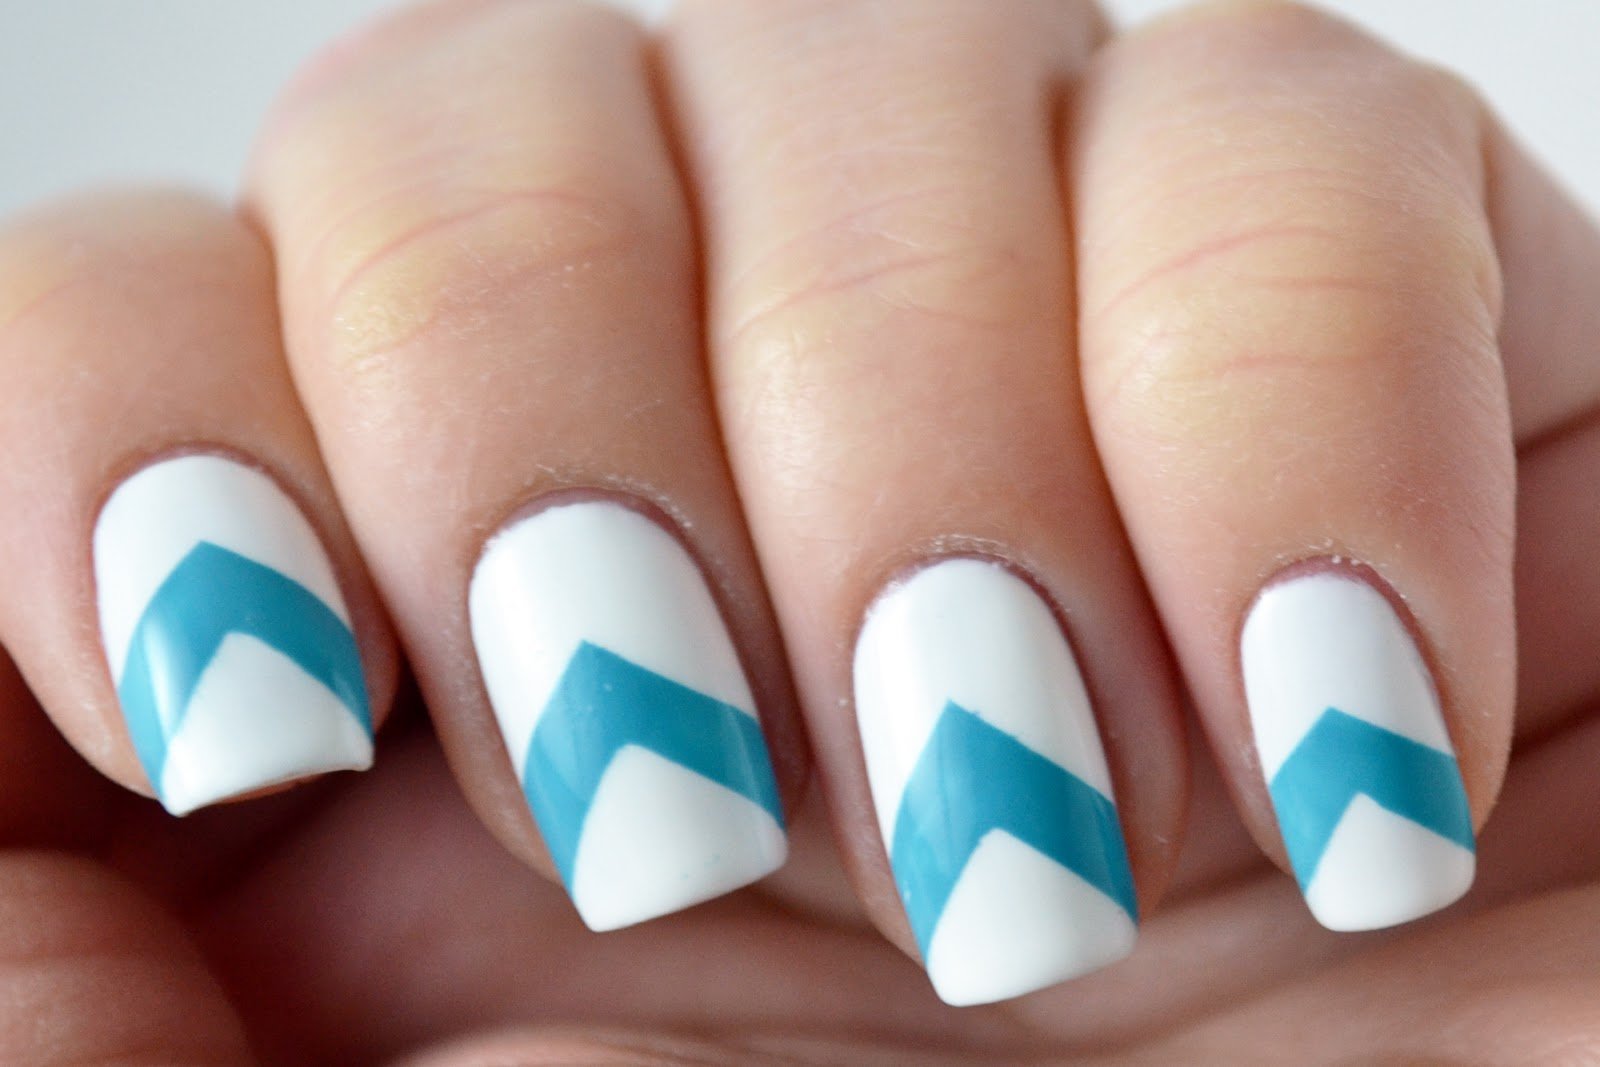 30 Striped Nail Designs and Ideas That'll Get You Noticed - wide 2